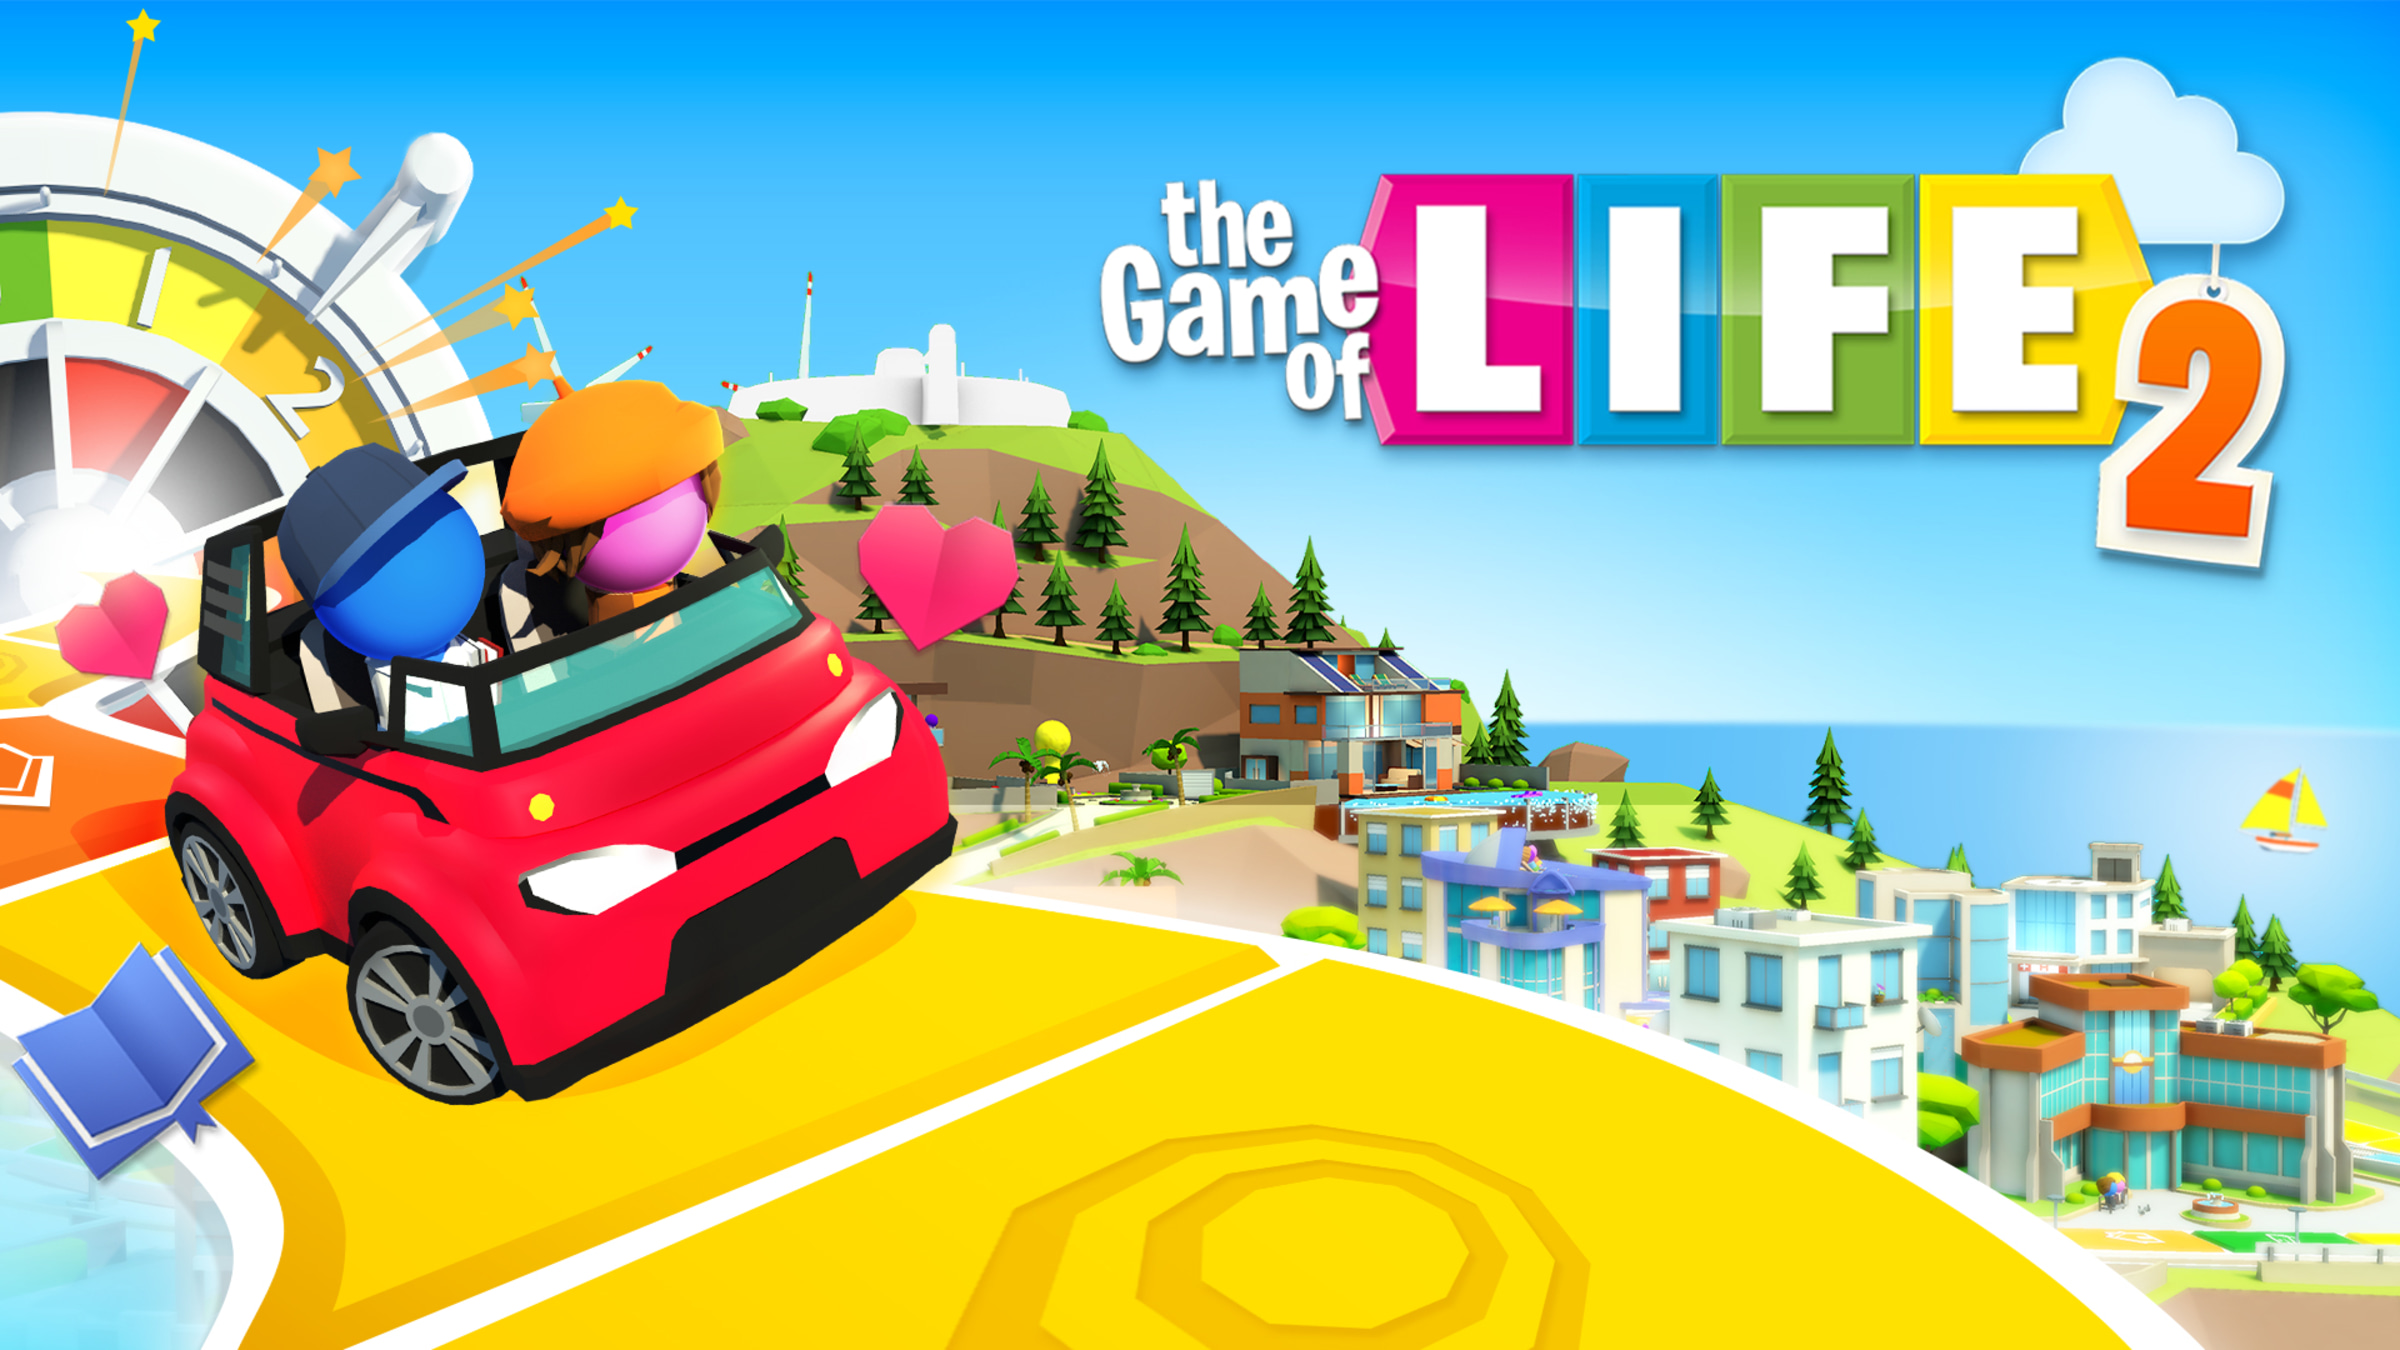 The Game Of Life 2 For Nintendo Switch - Nintendo Official Site